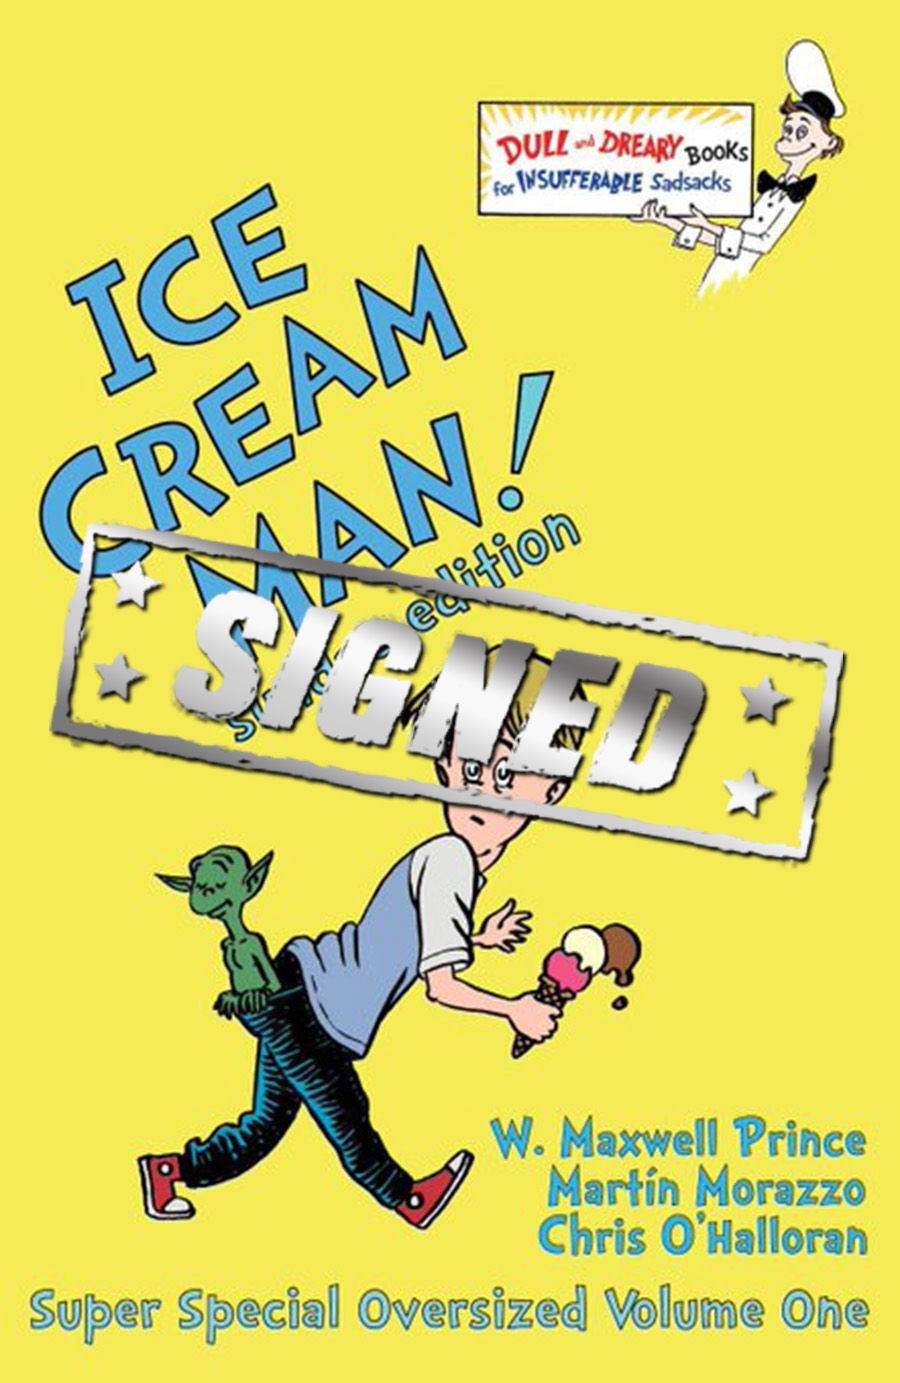 Ice Cream Man Sundae Edition Vol 1 HC Exclusive Variant Signed by Prince Morazzo & OHalloran